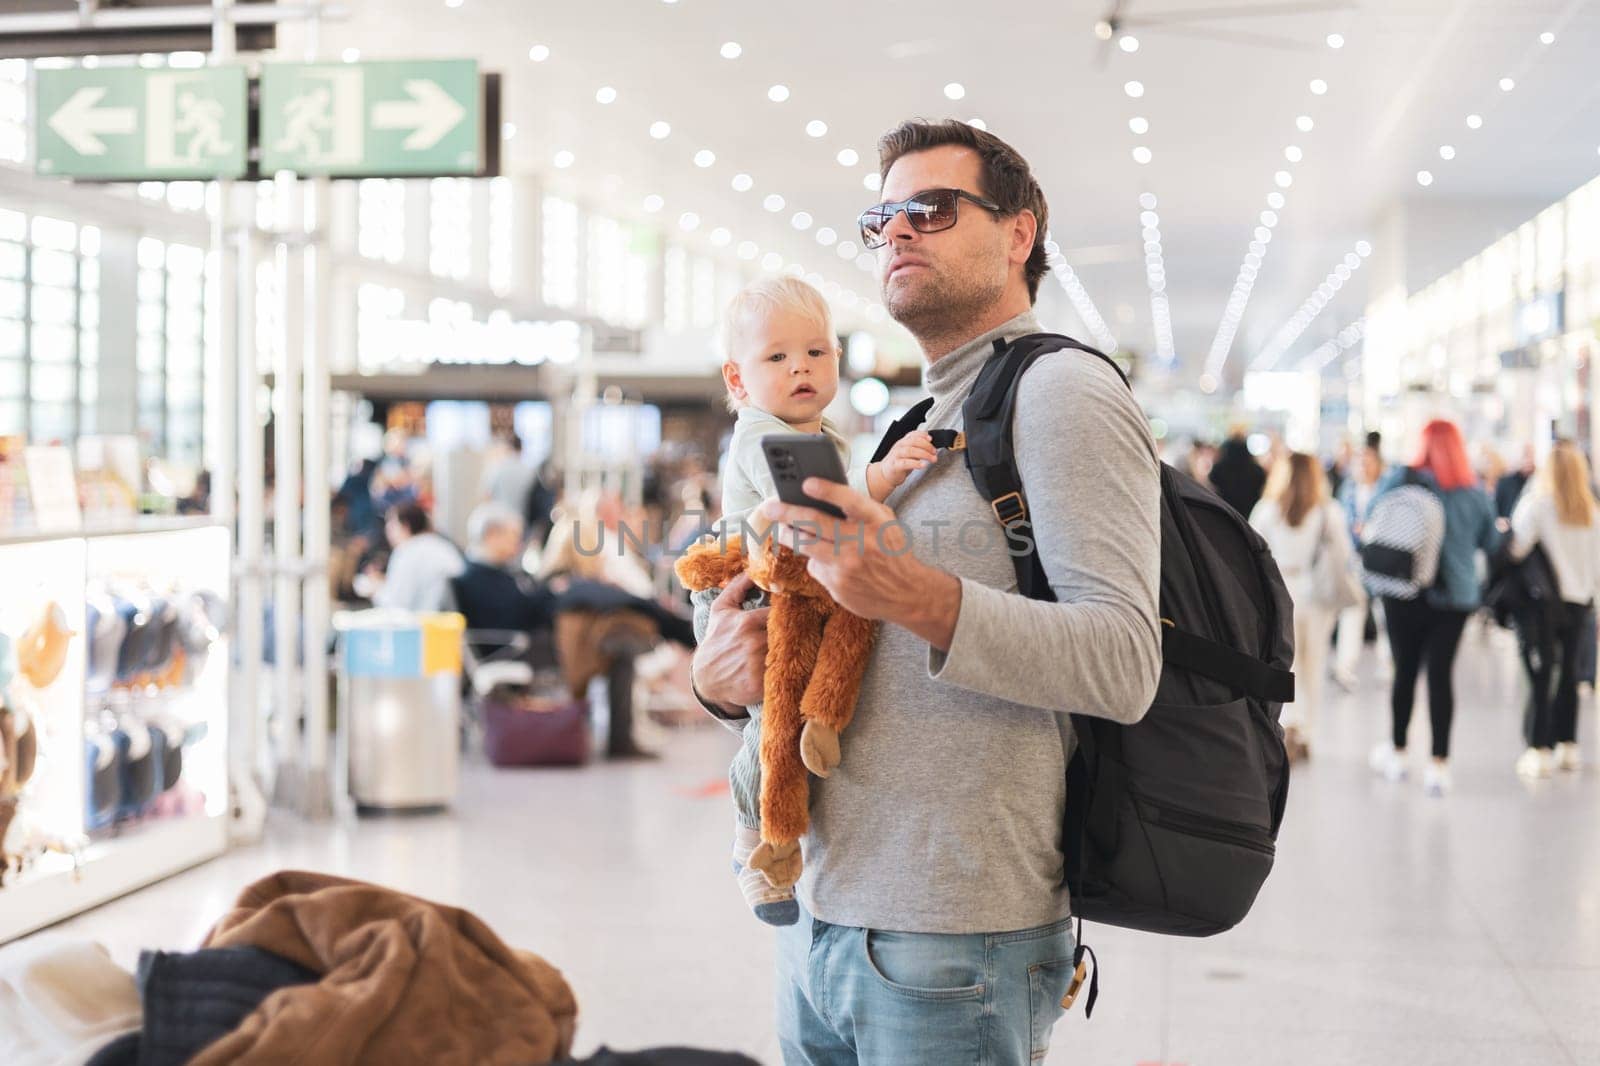 Father traveling with child, holding his infant baby boy at airport terminal, checking flight schedule, waiting to board a plane. Travel with kids concept